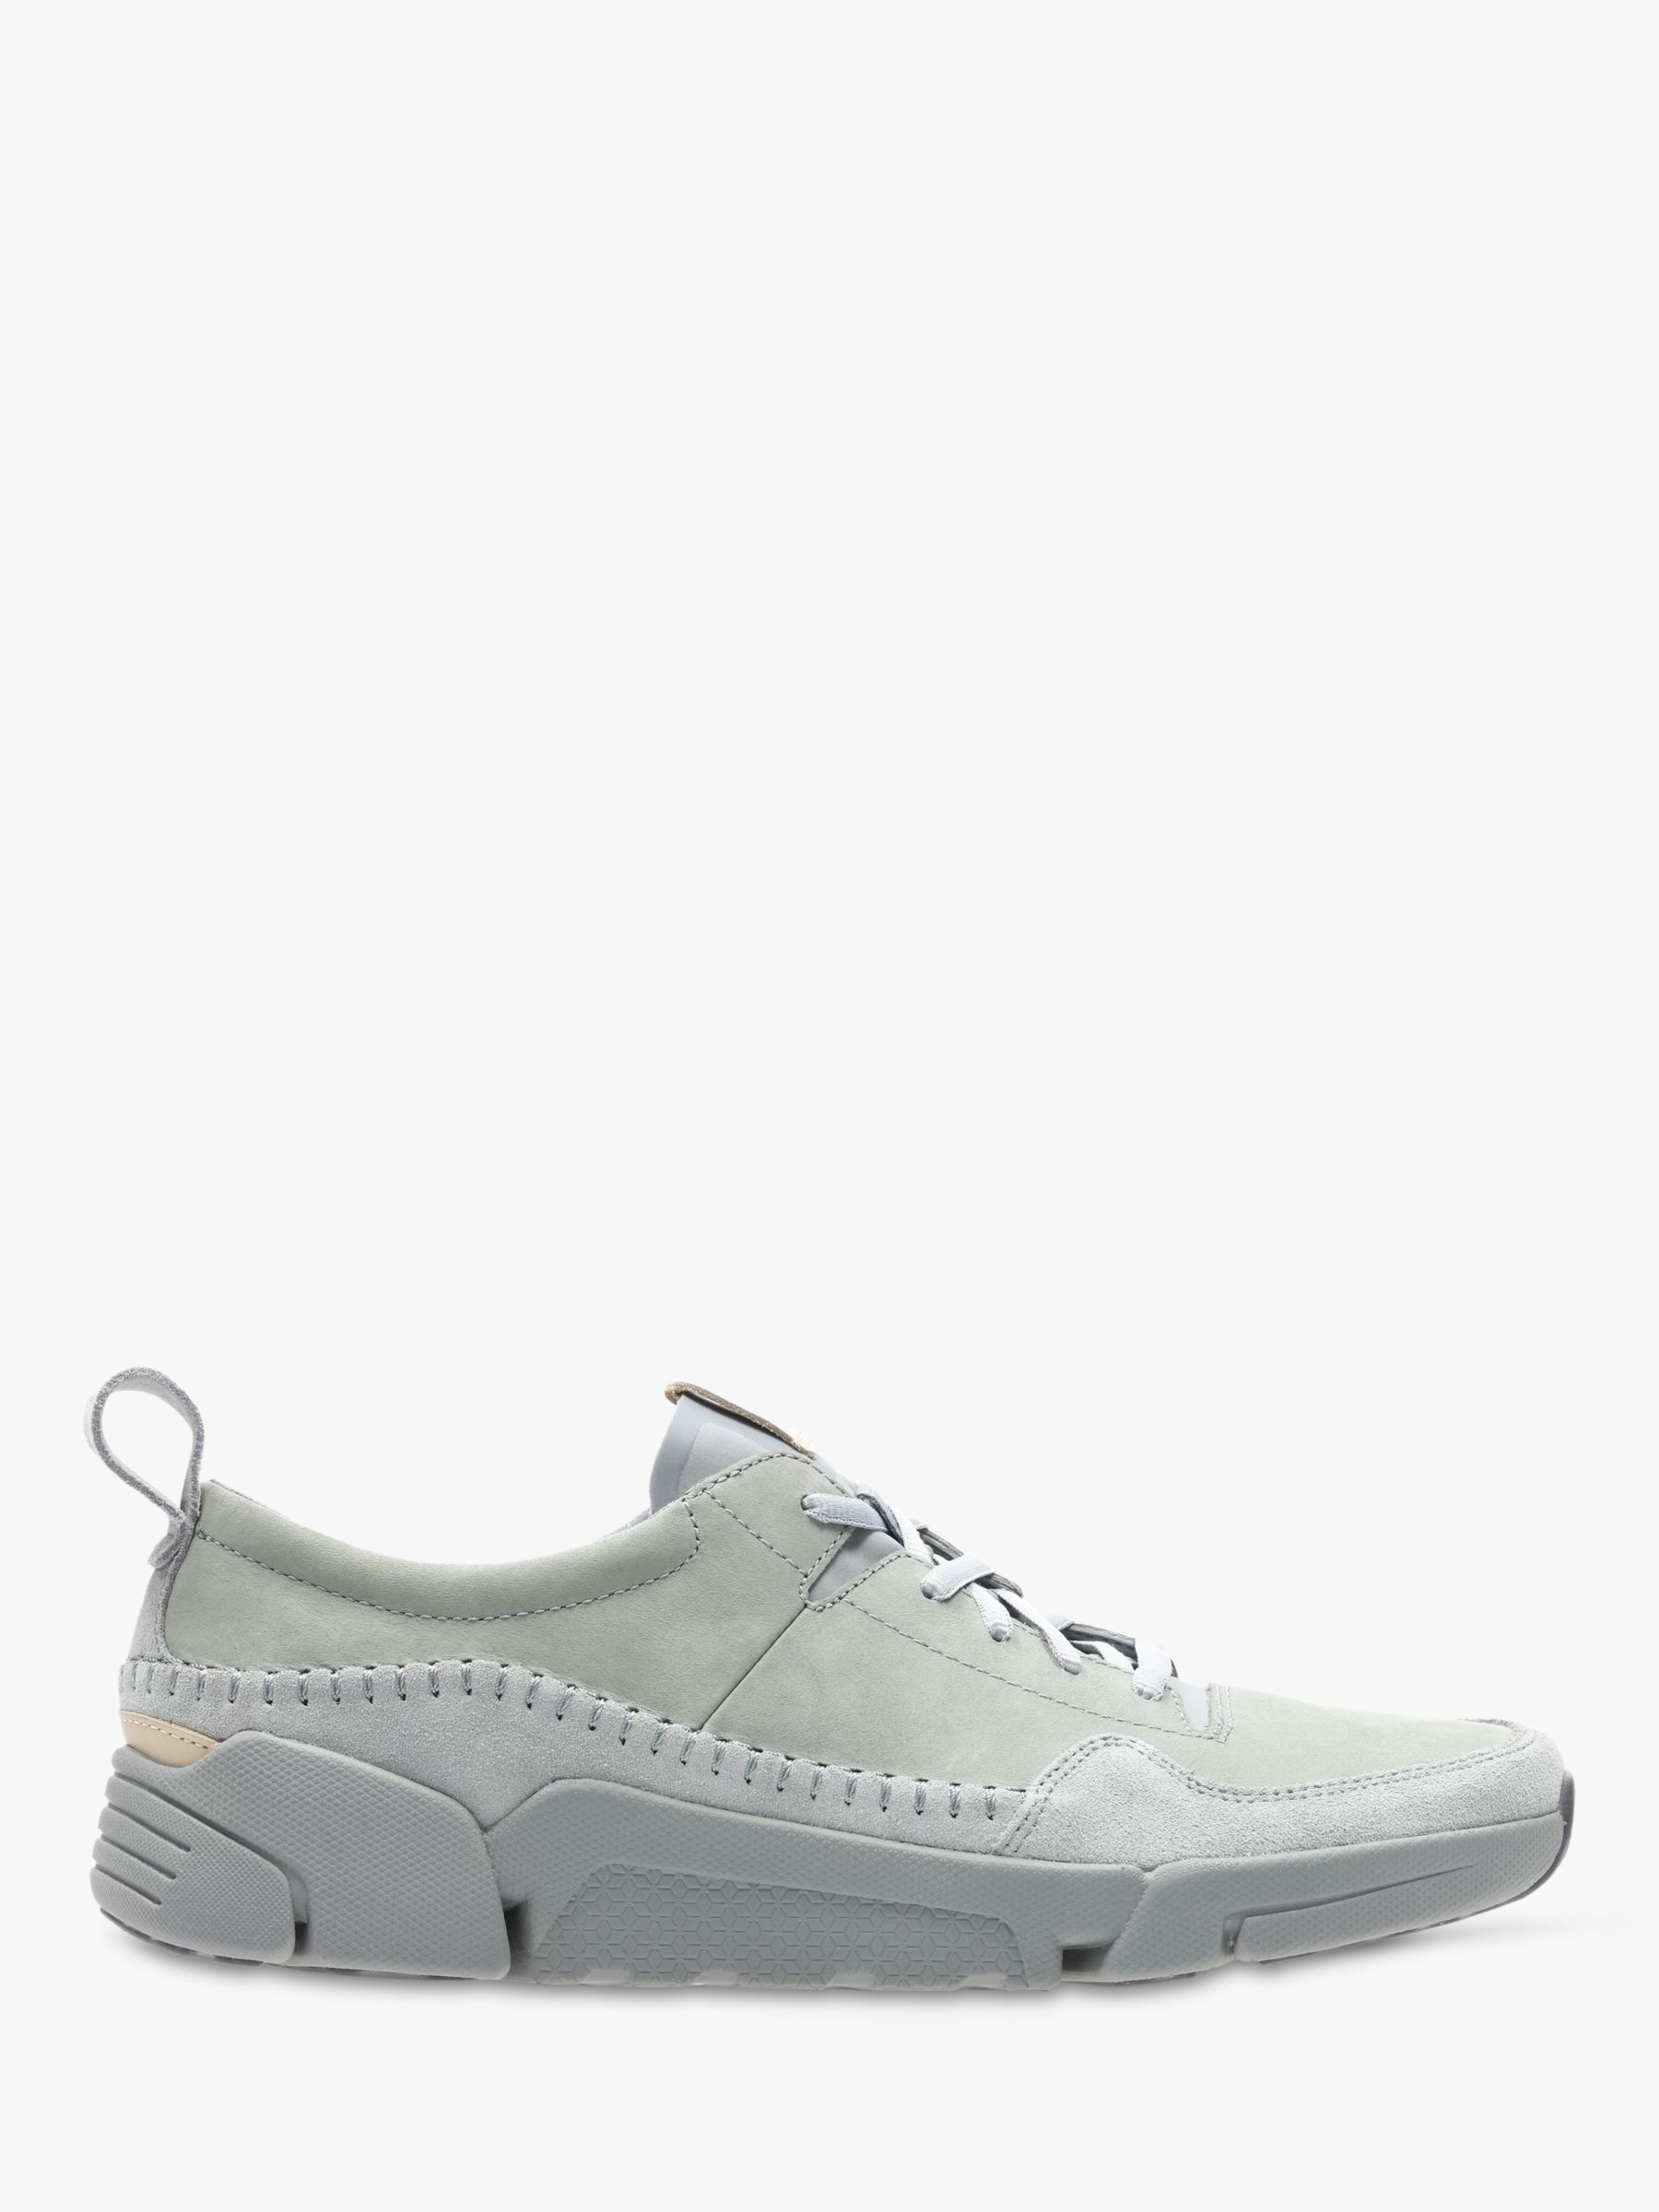 Clarks TriActive Run Leather Trainers, Grey